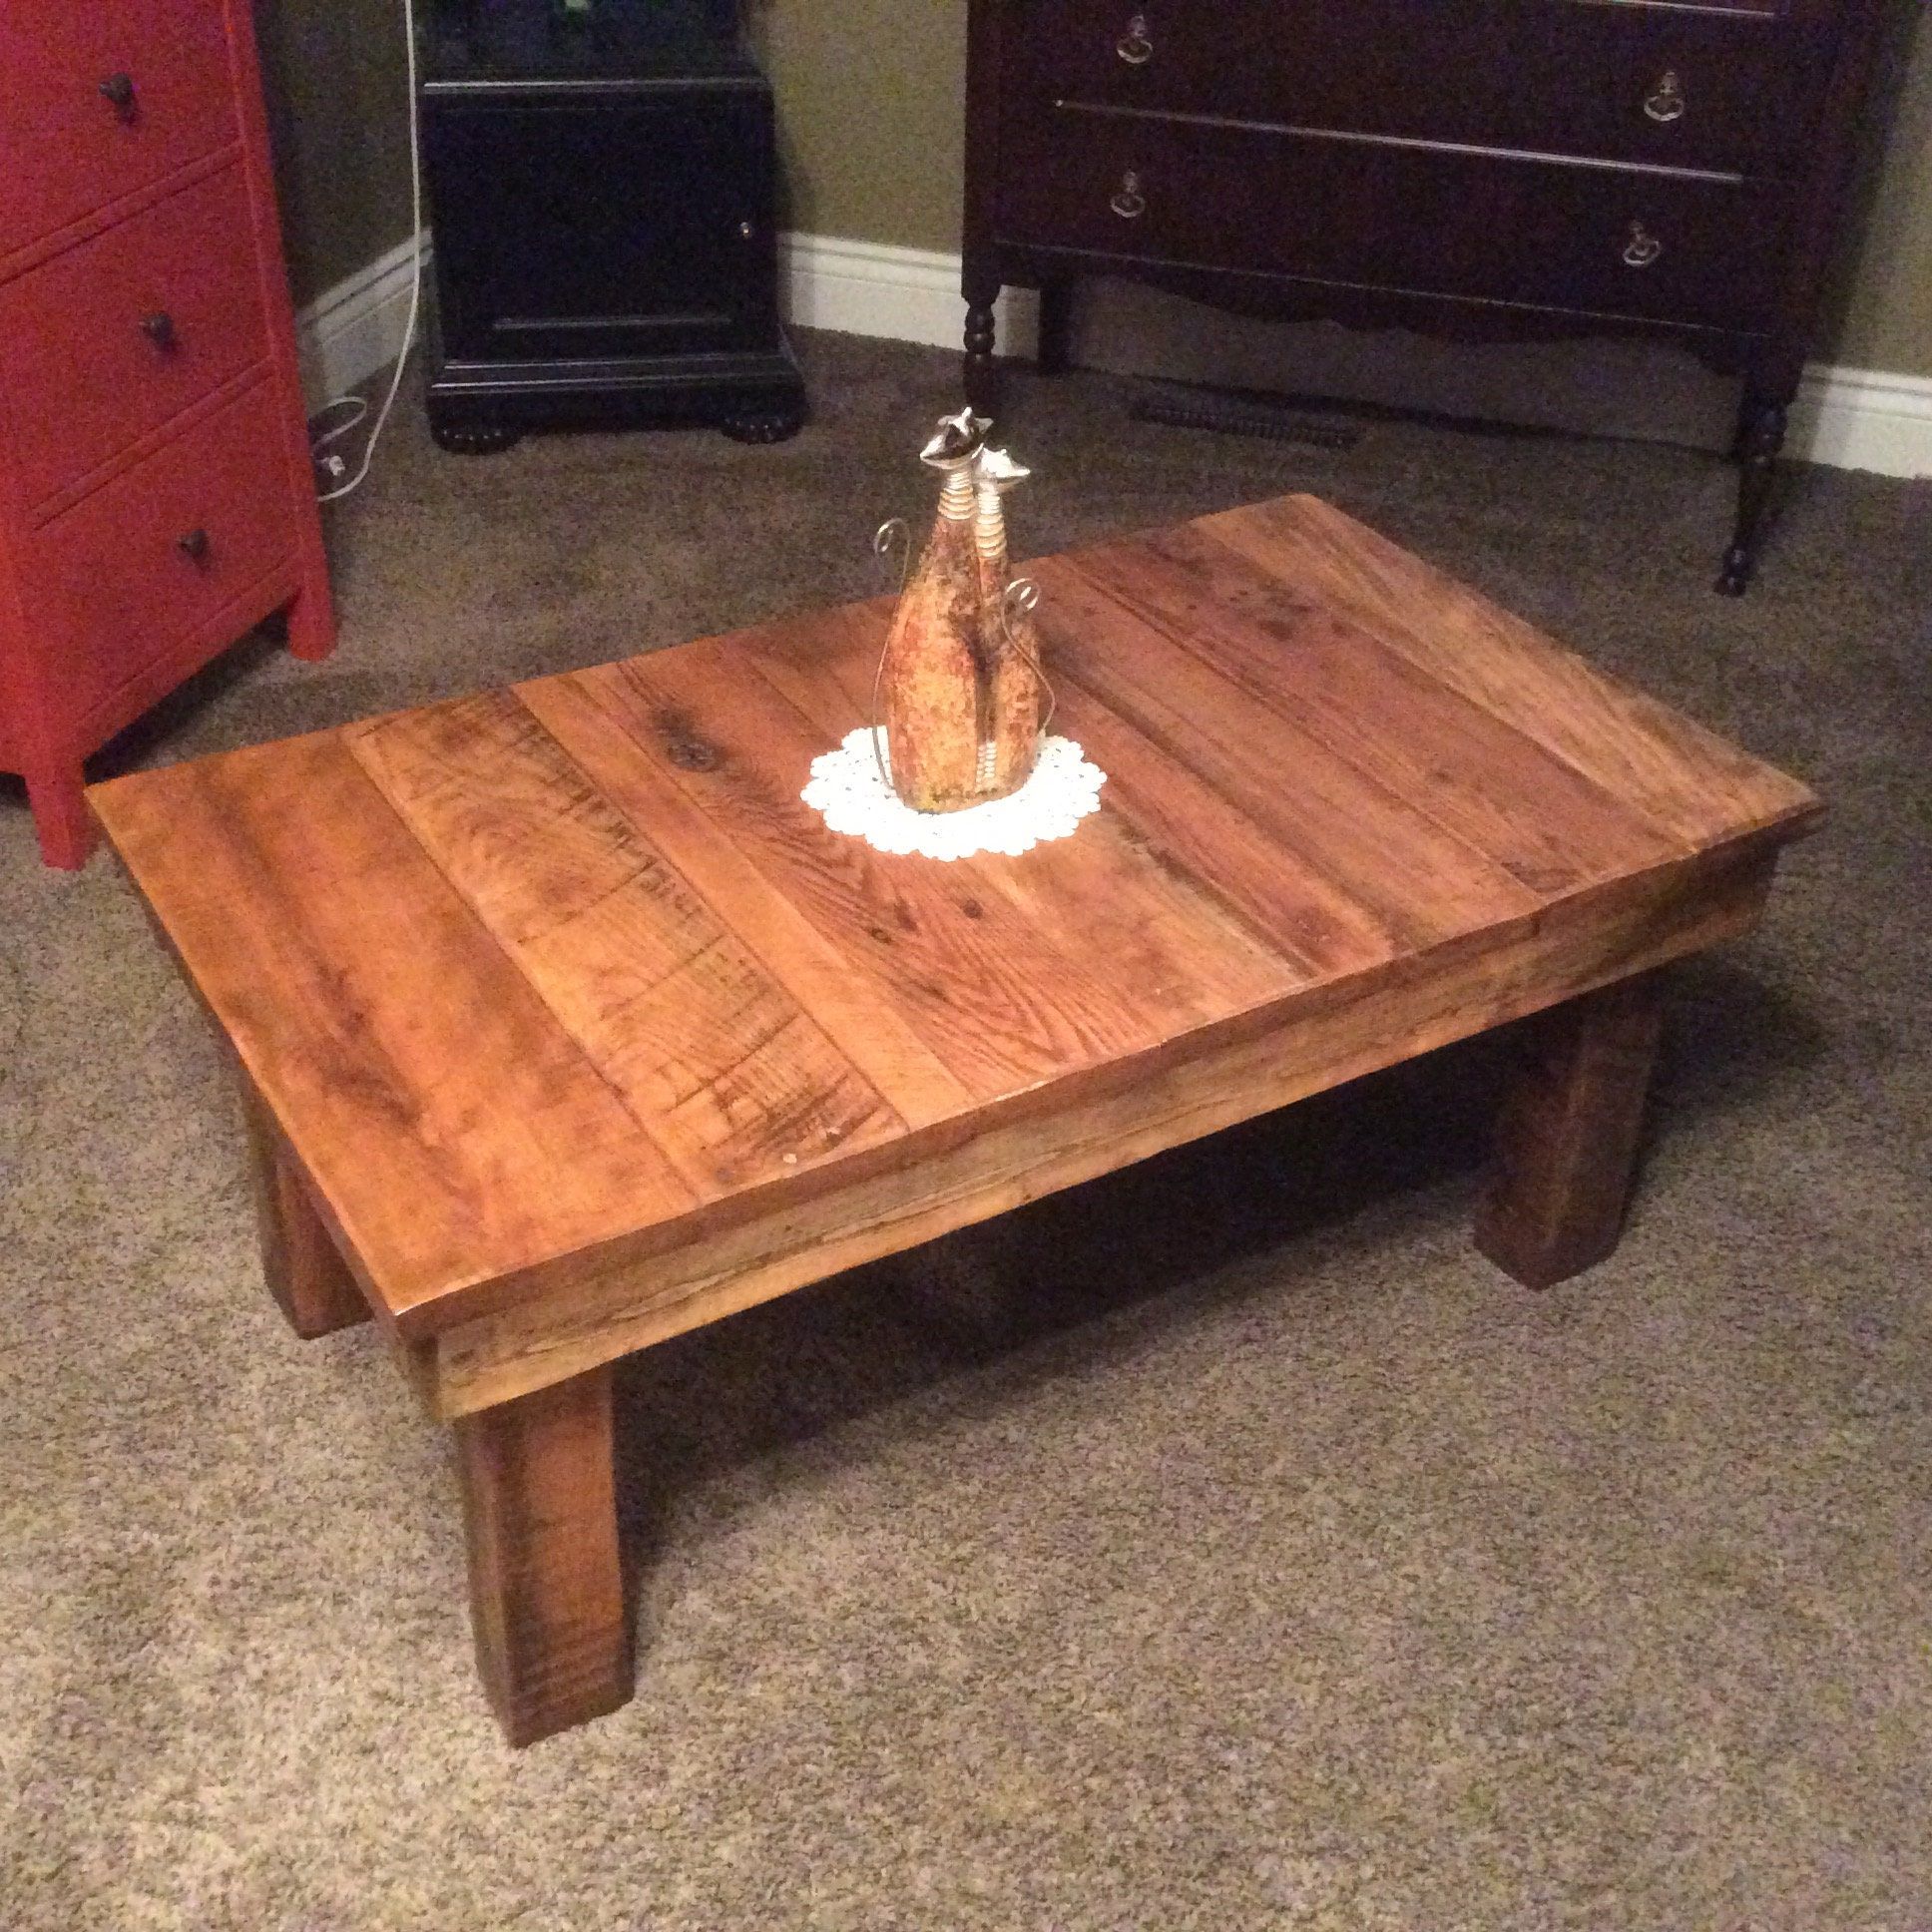 Reclaimed Wood Rustic Coffee Table Pertaining To Favorite Barnwood Coffee Tables (View 3 of 20)